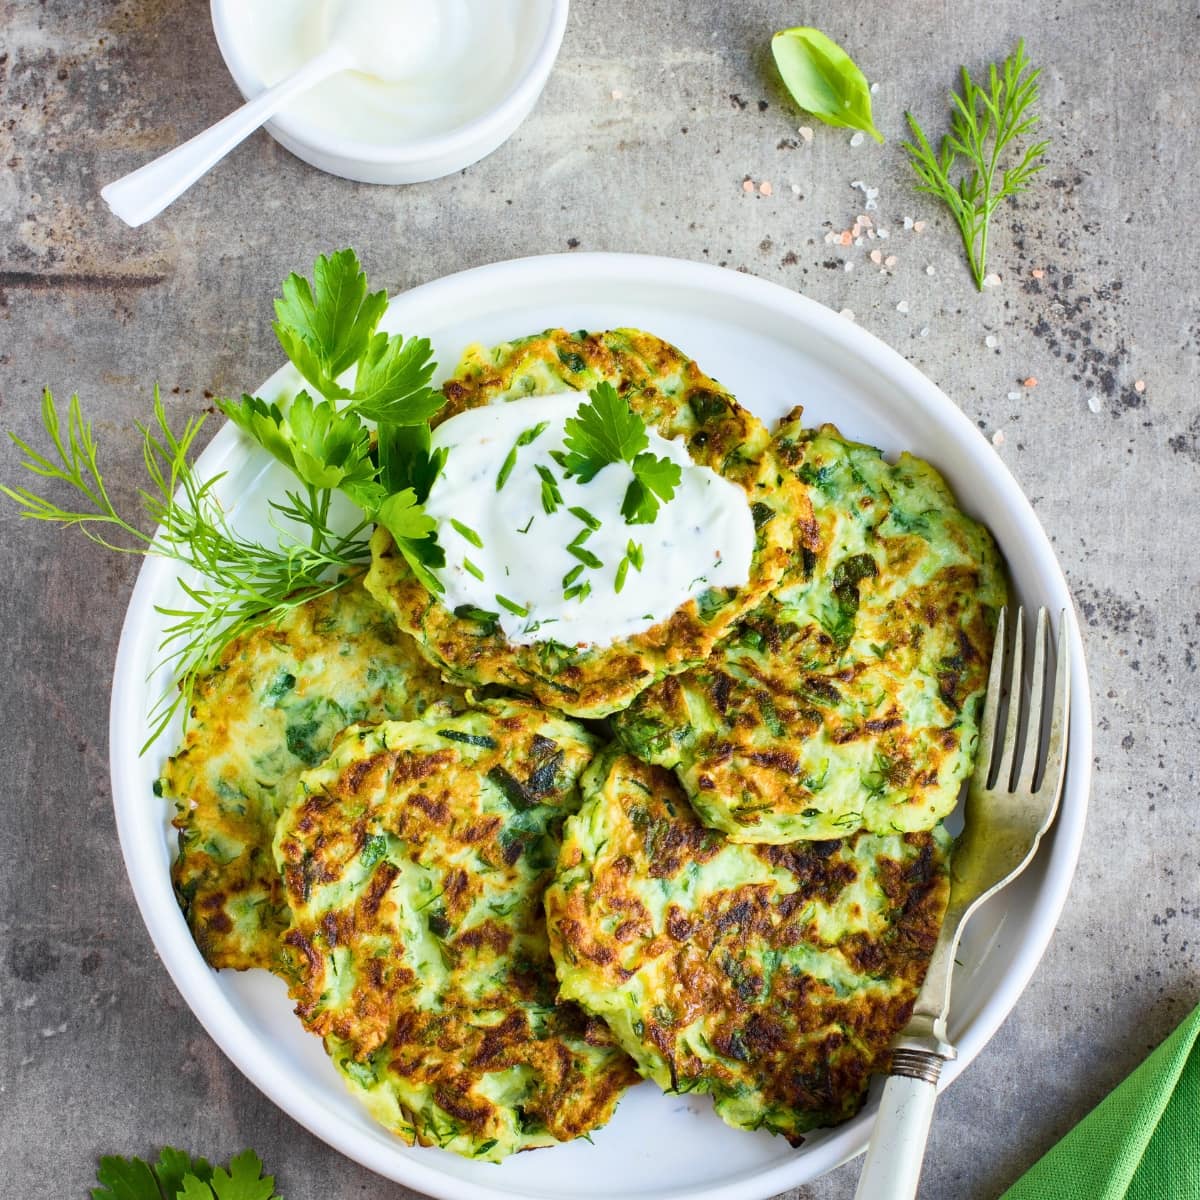 Zucchini fritters in a plate served with yogurt cream garnished with fresh dill and parsley leaves.